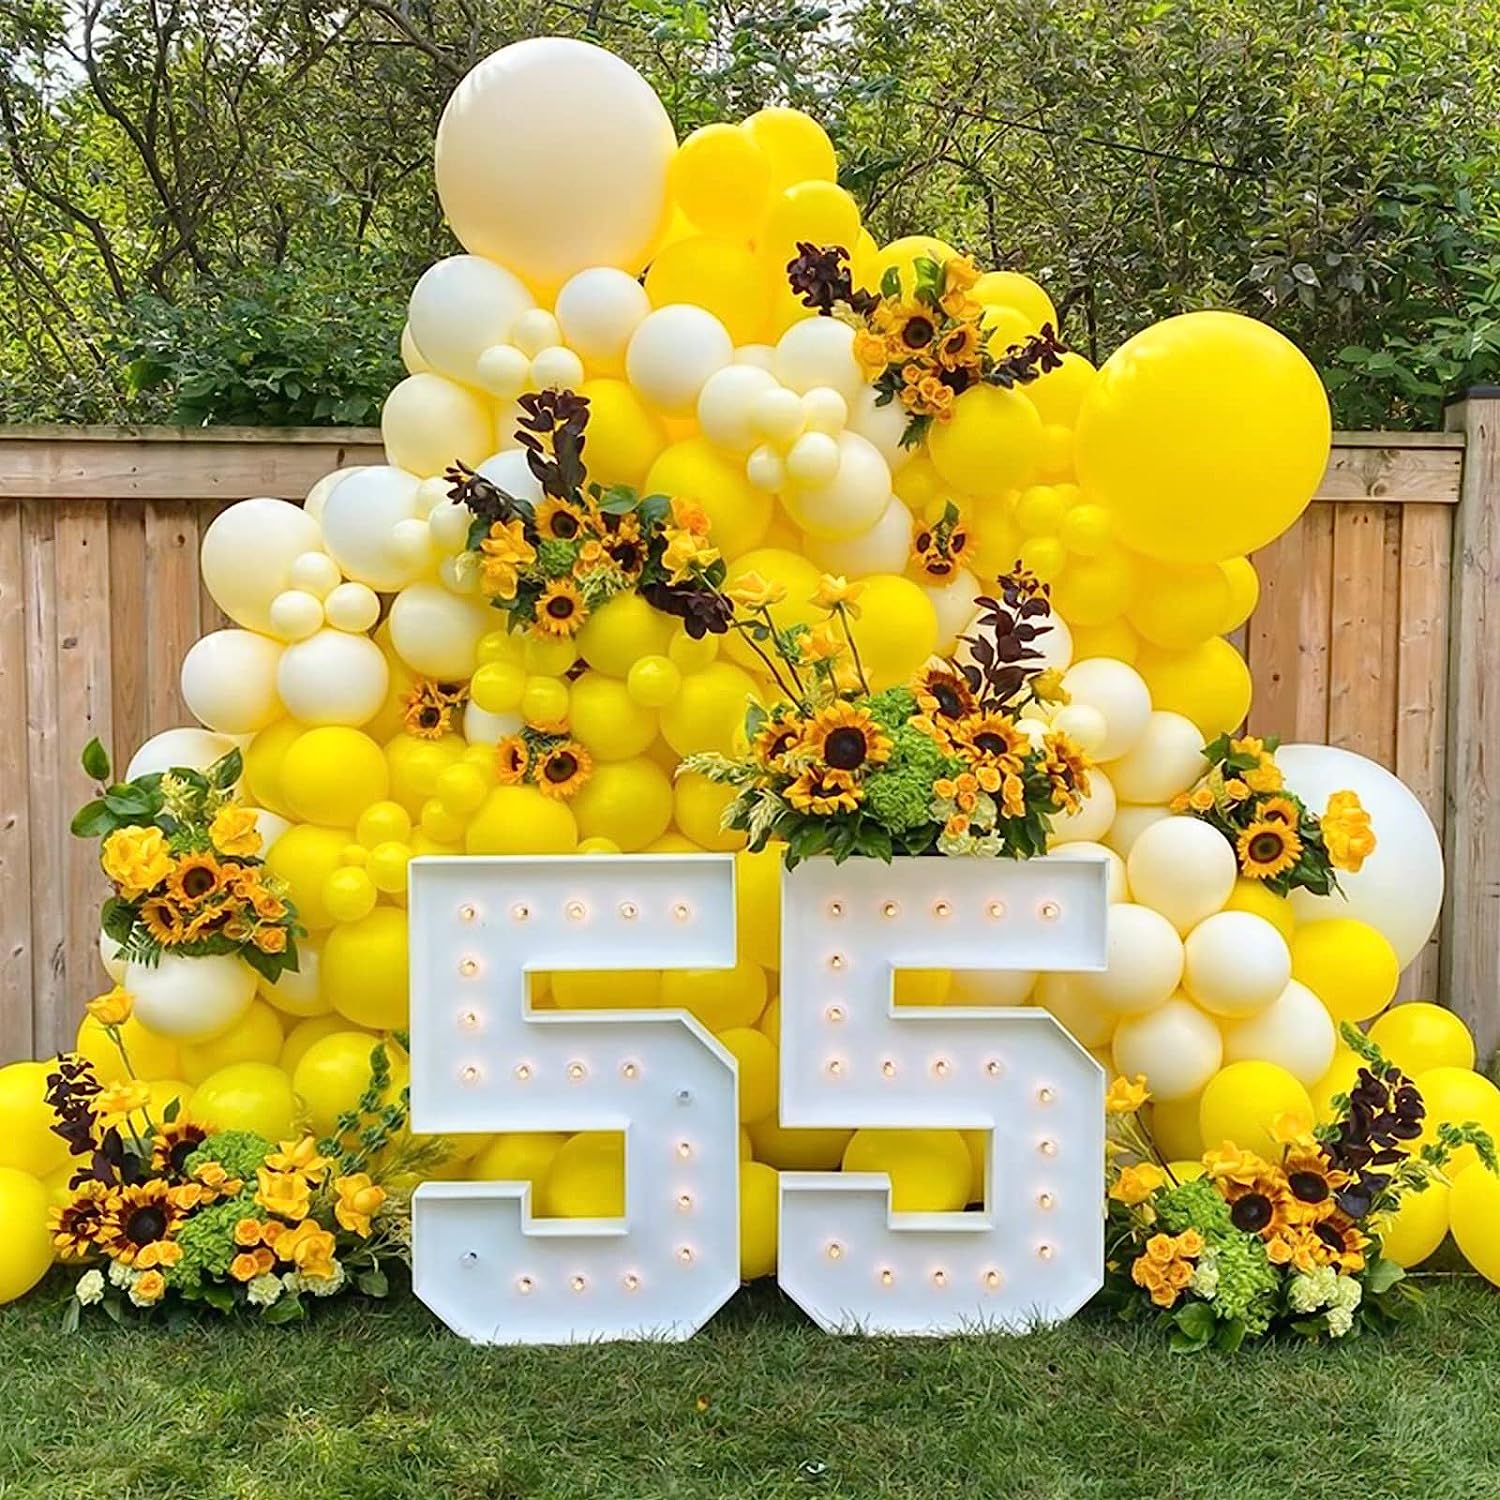 Yellow Balloon Decoration Set, includes 3 sets of balloons, including 12&quot; round yellow balloons, 12&quot; star yellow balloons and 12&quot; heart yellow balloons. Balloons are made of high quality material and durable. Balloons can be used for a variety of occasions including birthday parties, wedding anniversaries, Valentine&